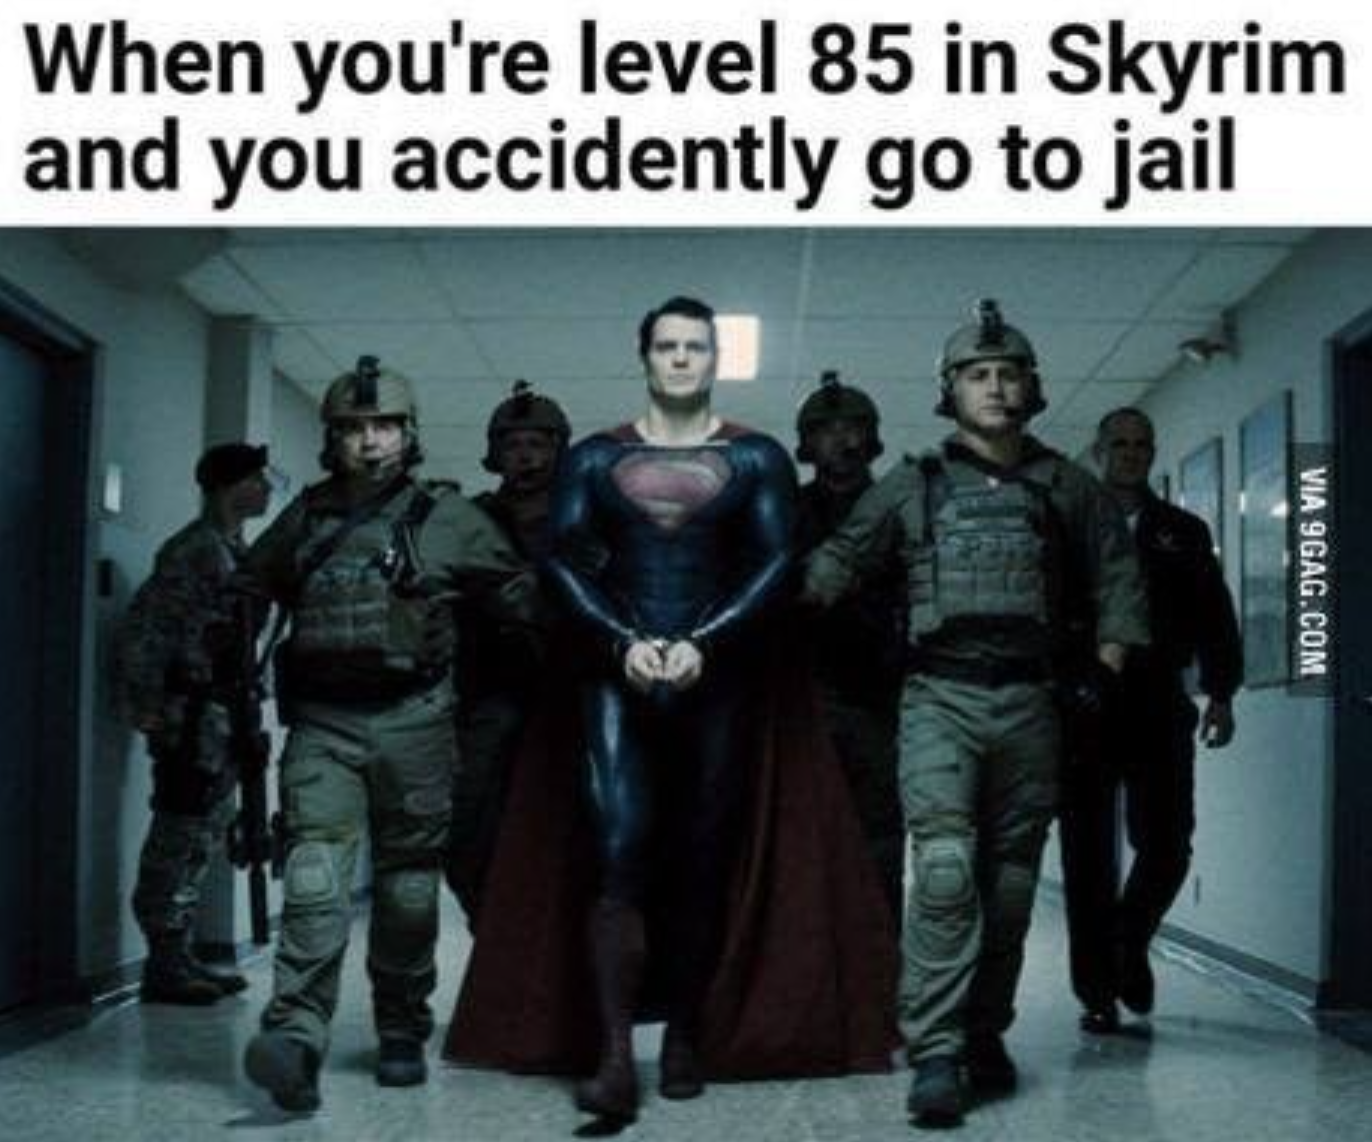 funny gaming memes - man of steel - When you're level 85 in Skyrim and you accidently go to jail Via 9GAG.Com